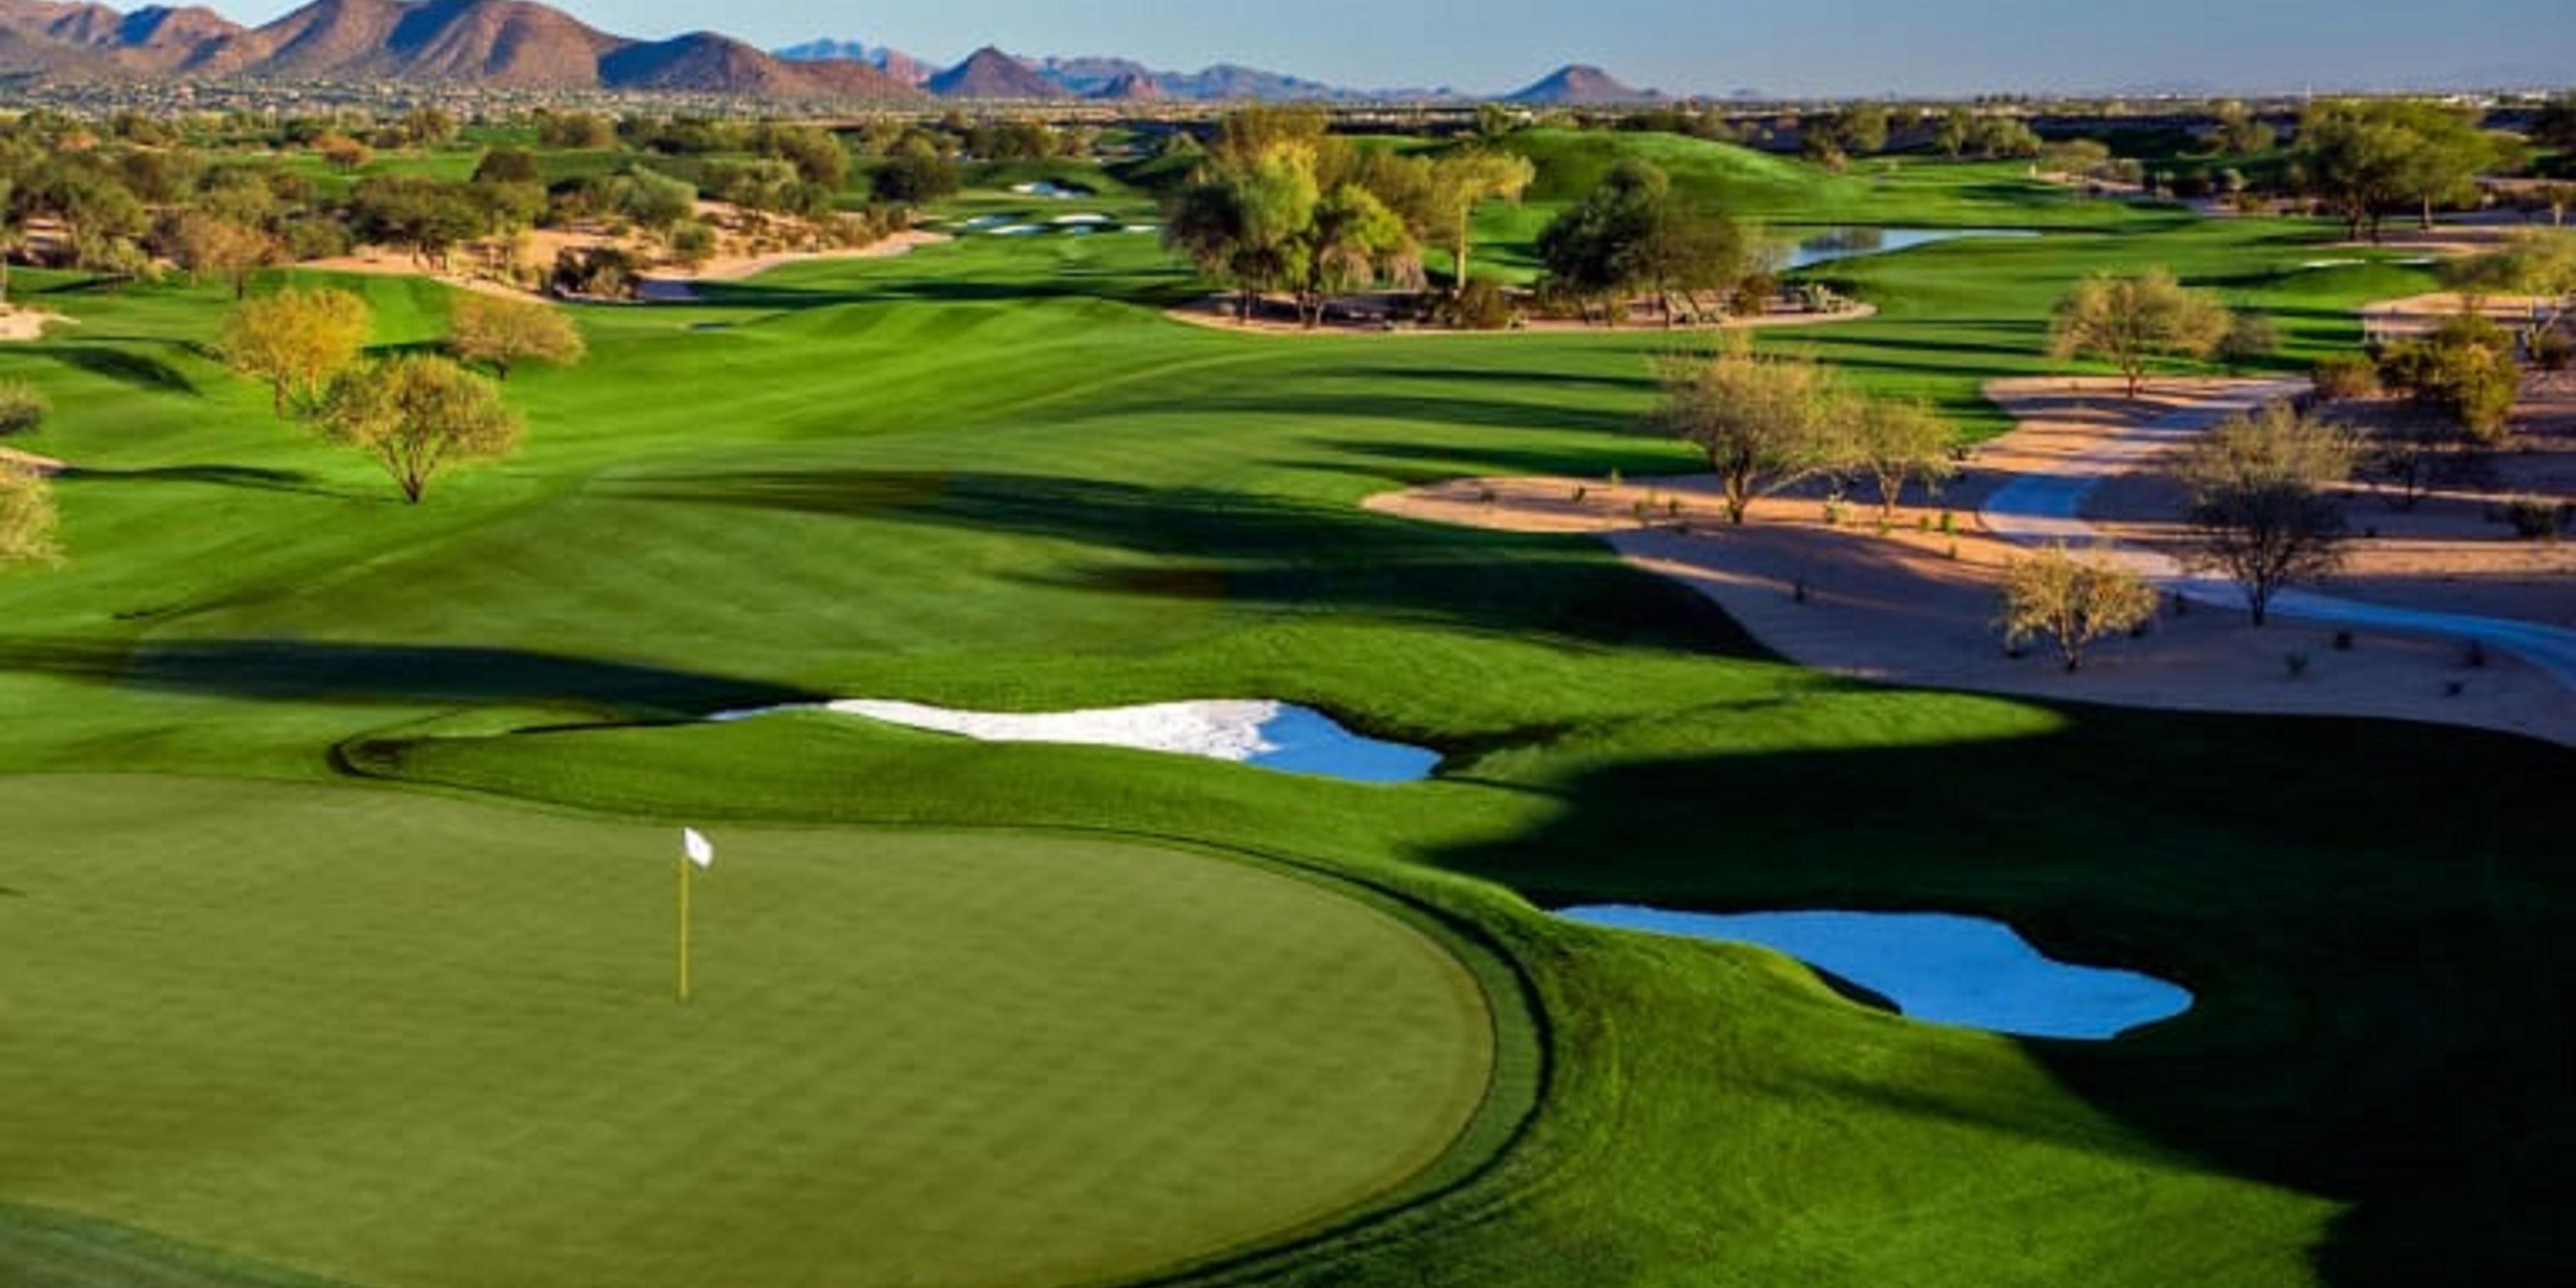 Scottsdale is the perfect destination for the US golf break you've always dreamed of!  With over 300 golf courses, there is something for everyone! Escape the cold and come visit us this winter in the beautiful Arizona Sunshine.